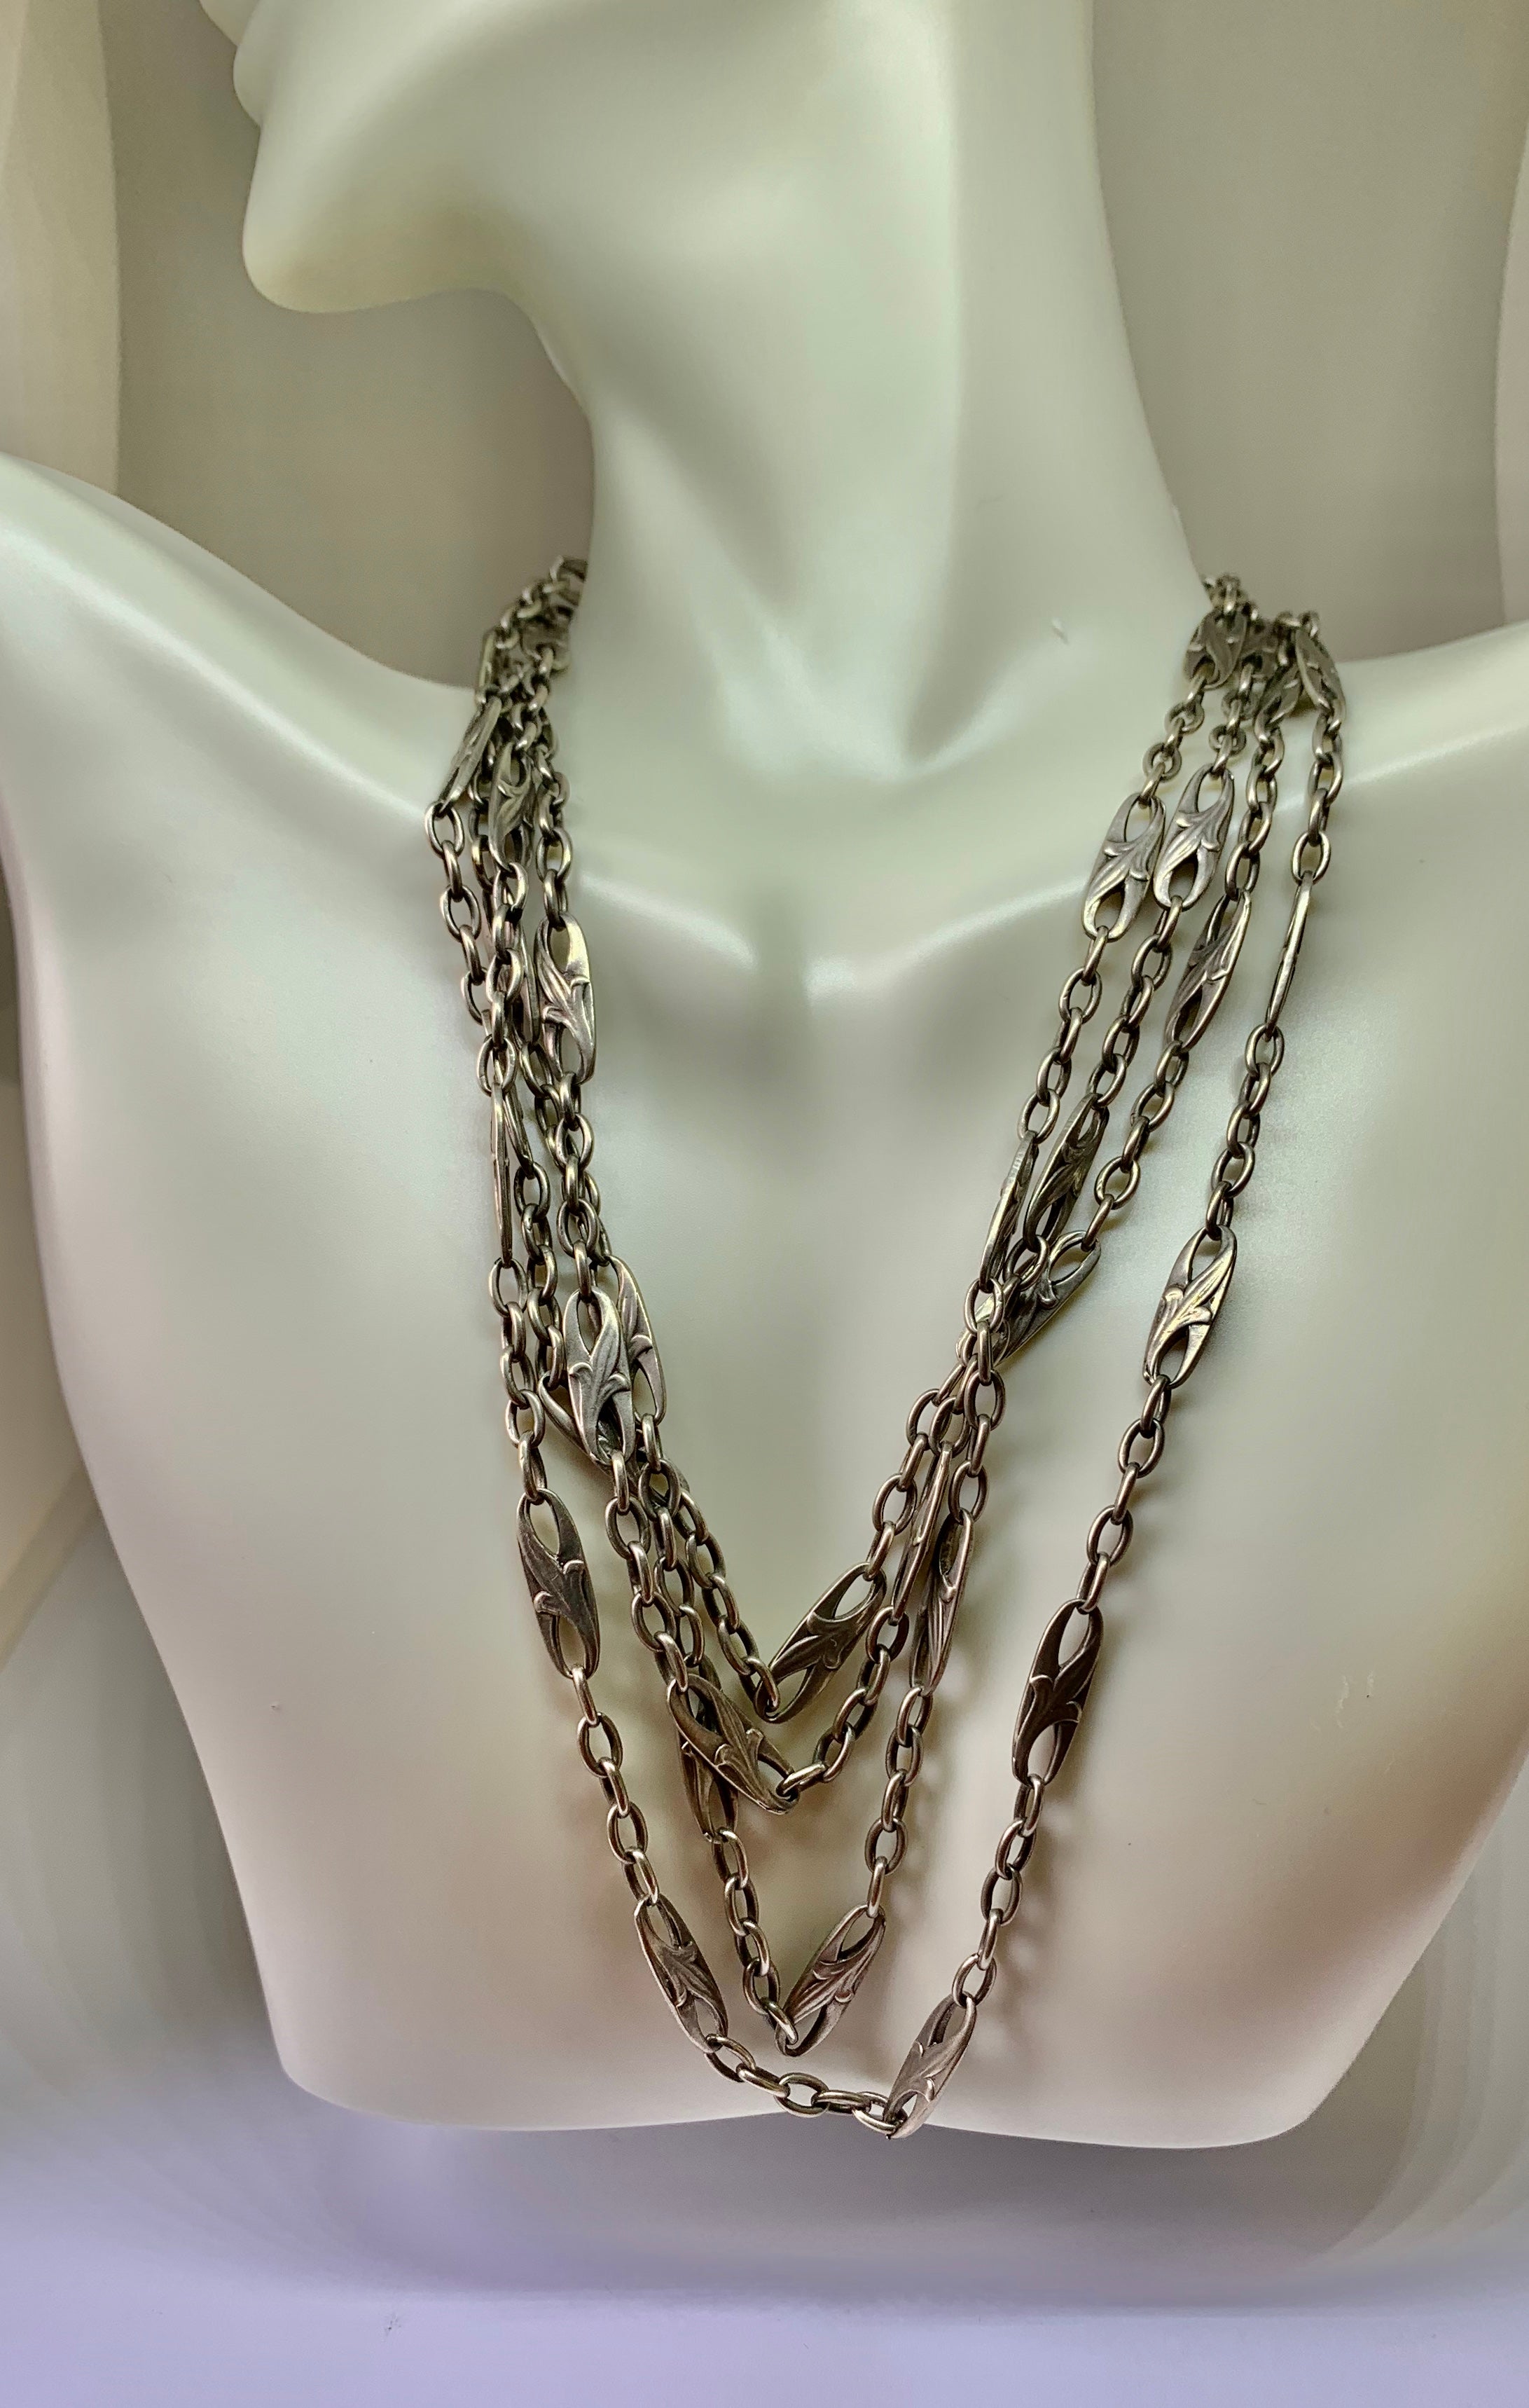 THIS IS A RARE MUSEUM QUALITY ART NOUVEAU - BELLE EPOQUE LONG CHAIN NECKLACE WITH THE MOST GORGEOUS ACANTHUS LEAF MOTIF LINKS IN SILVER AND OF A MAGNIFICENT 61 INCHES THE LENGTH.  THE NECKLACE DATING TO CIRCA 1890-1910.
It is very rare to find long